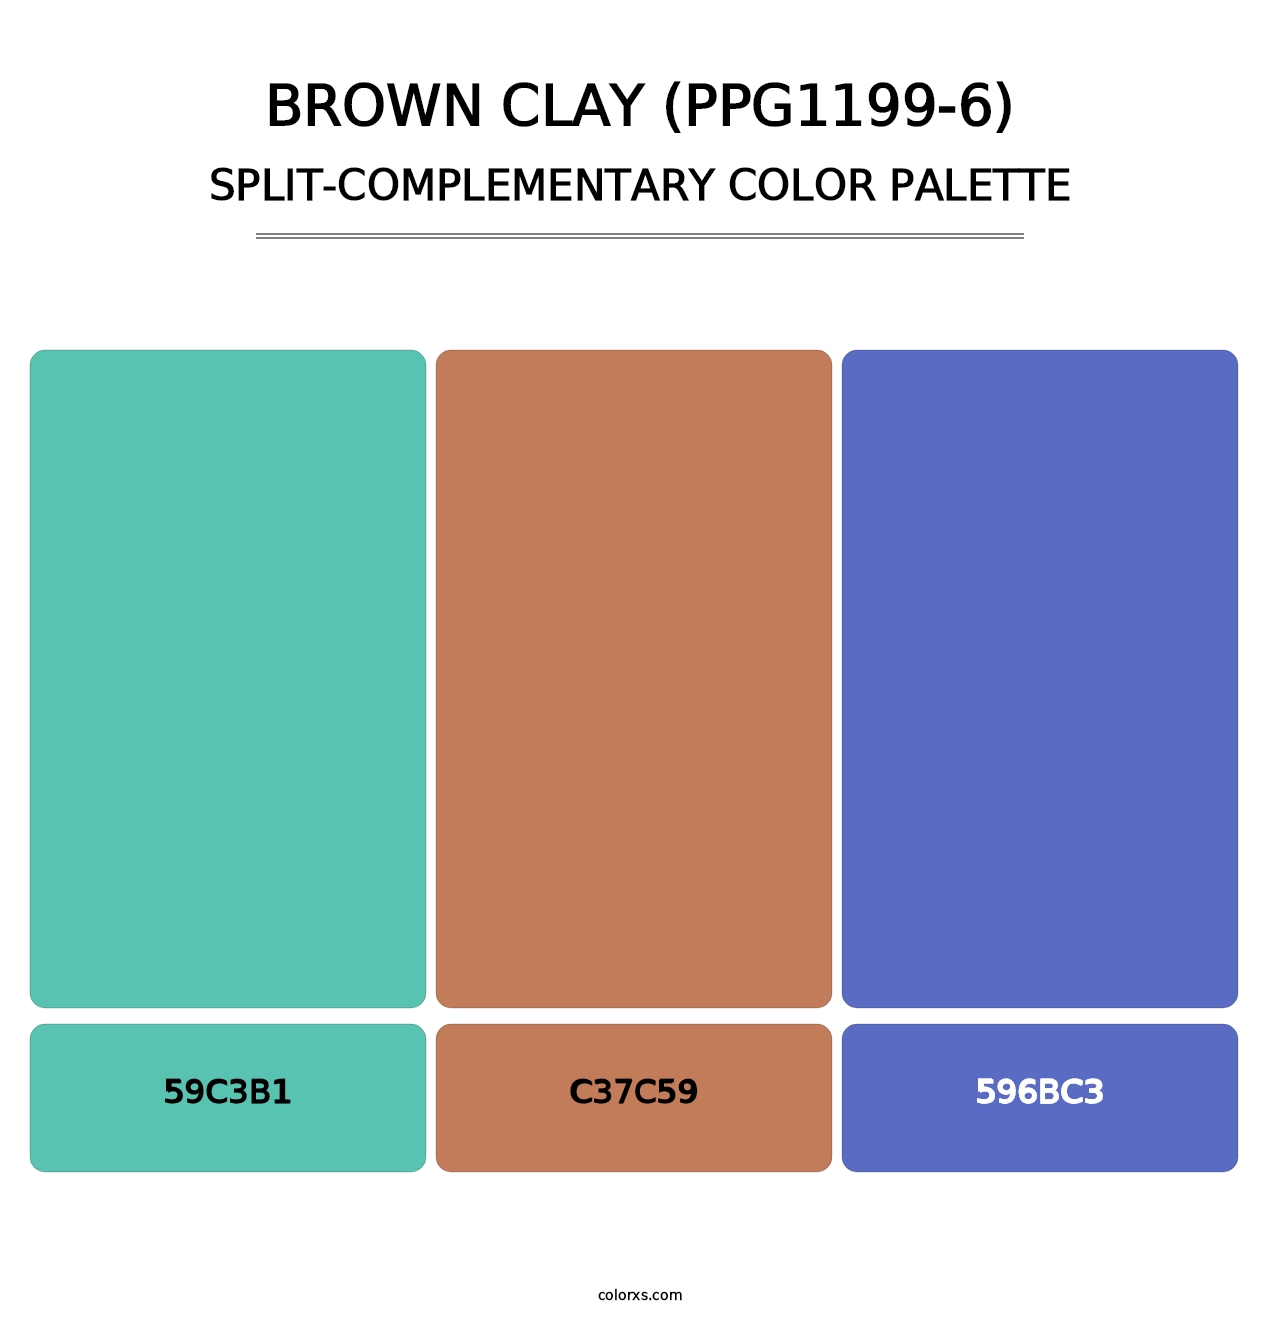 Brown Clay (PPG1199-6) - Split-Complementary Color Palette